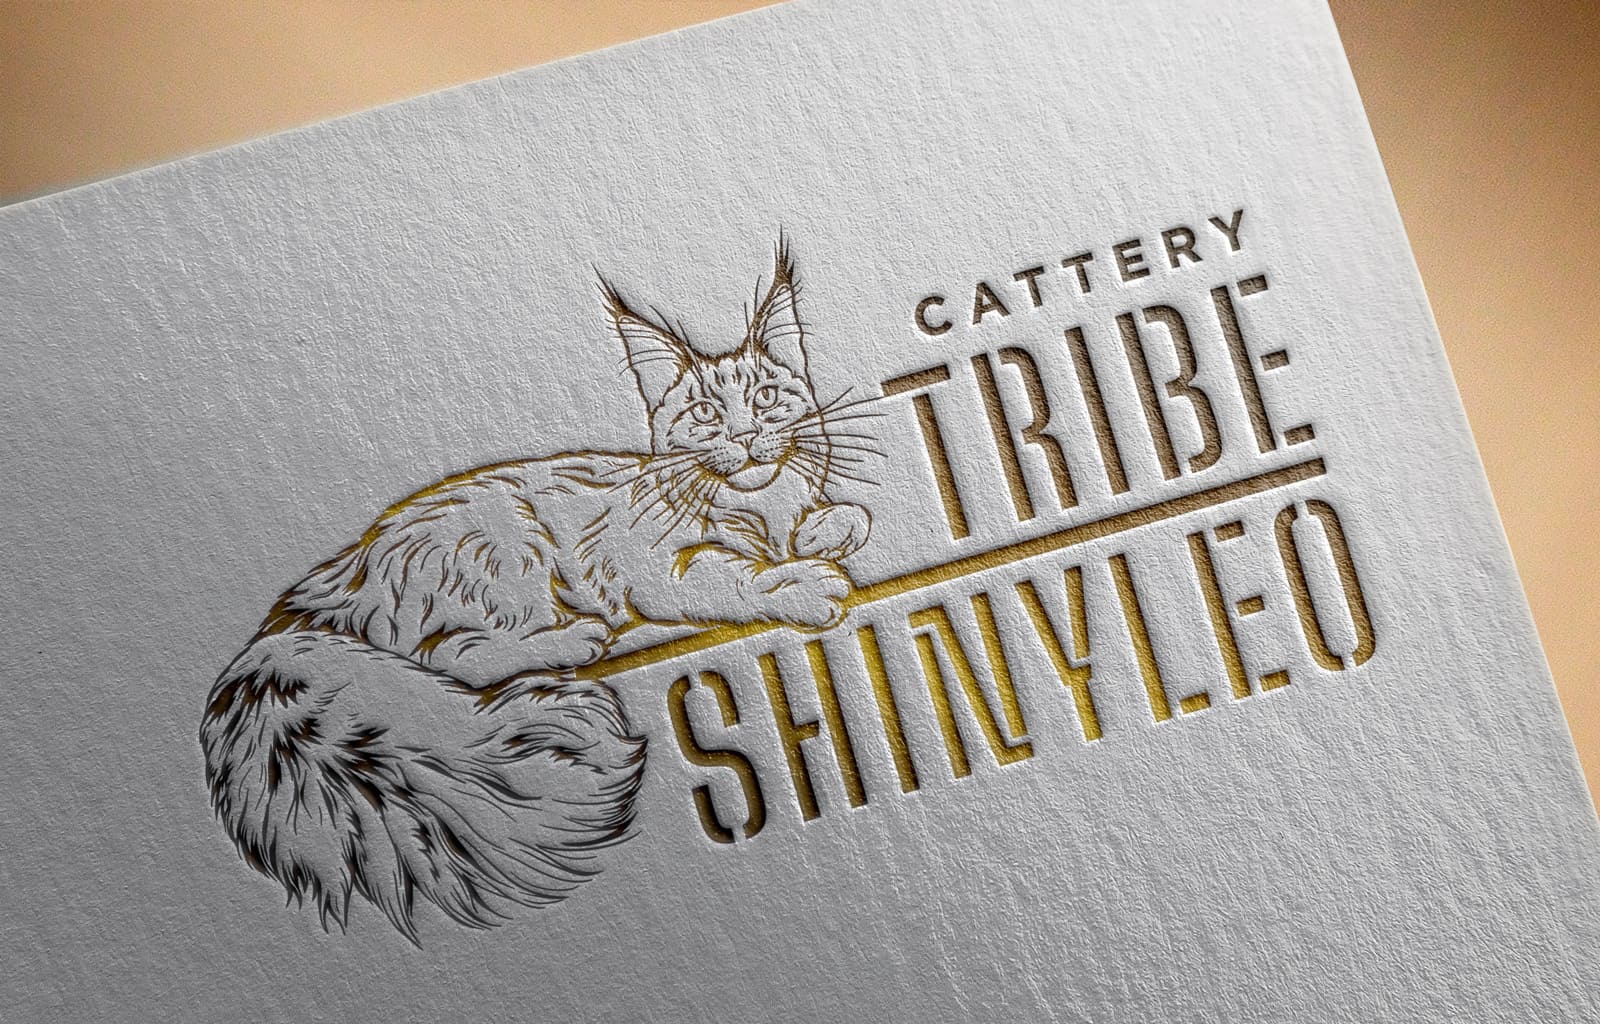 Maine Coon cattery logo